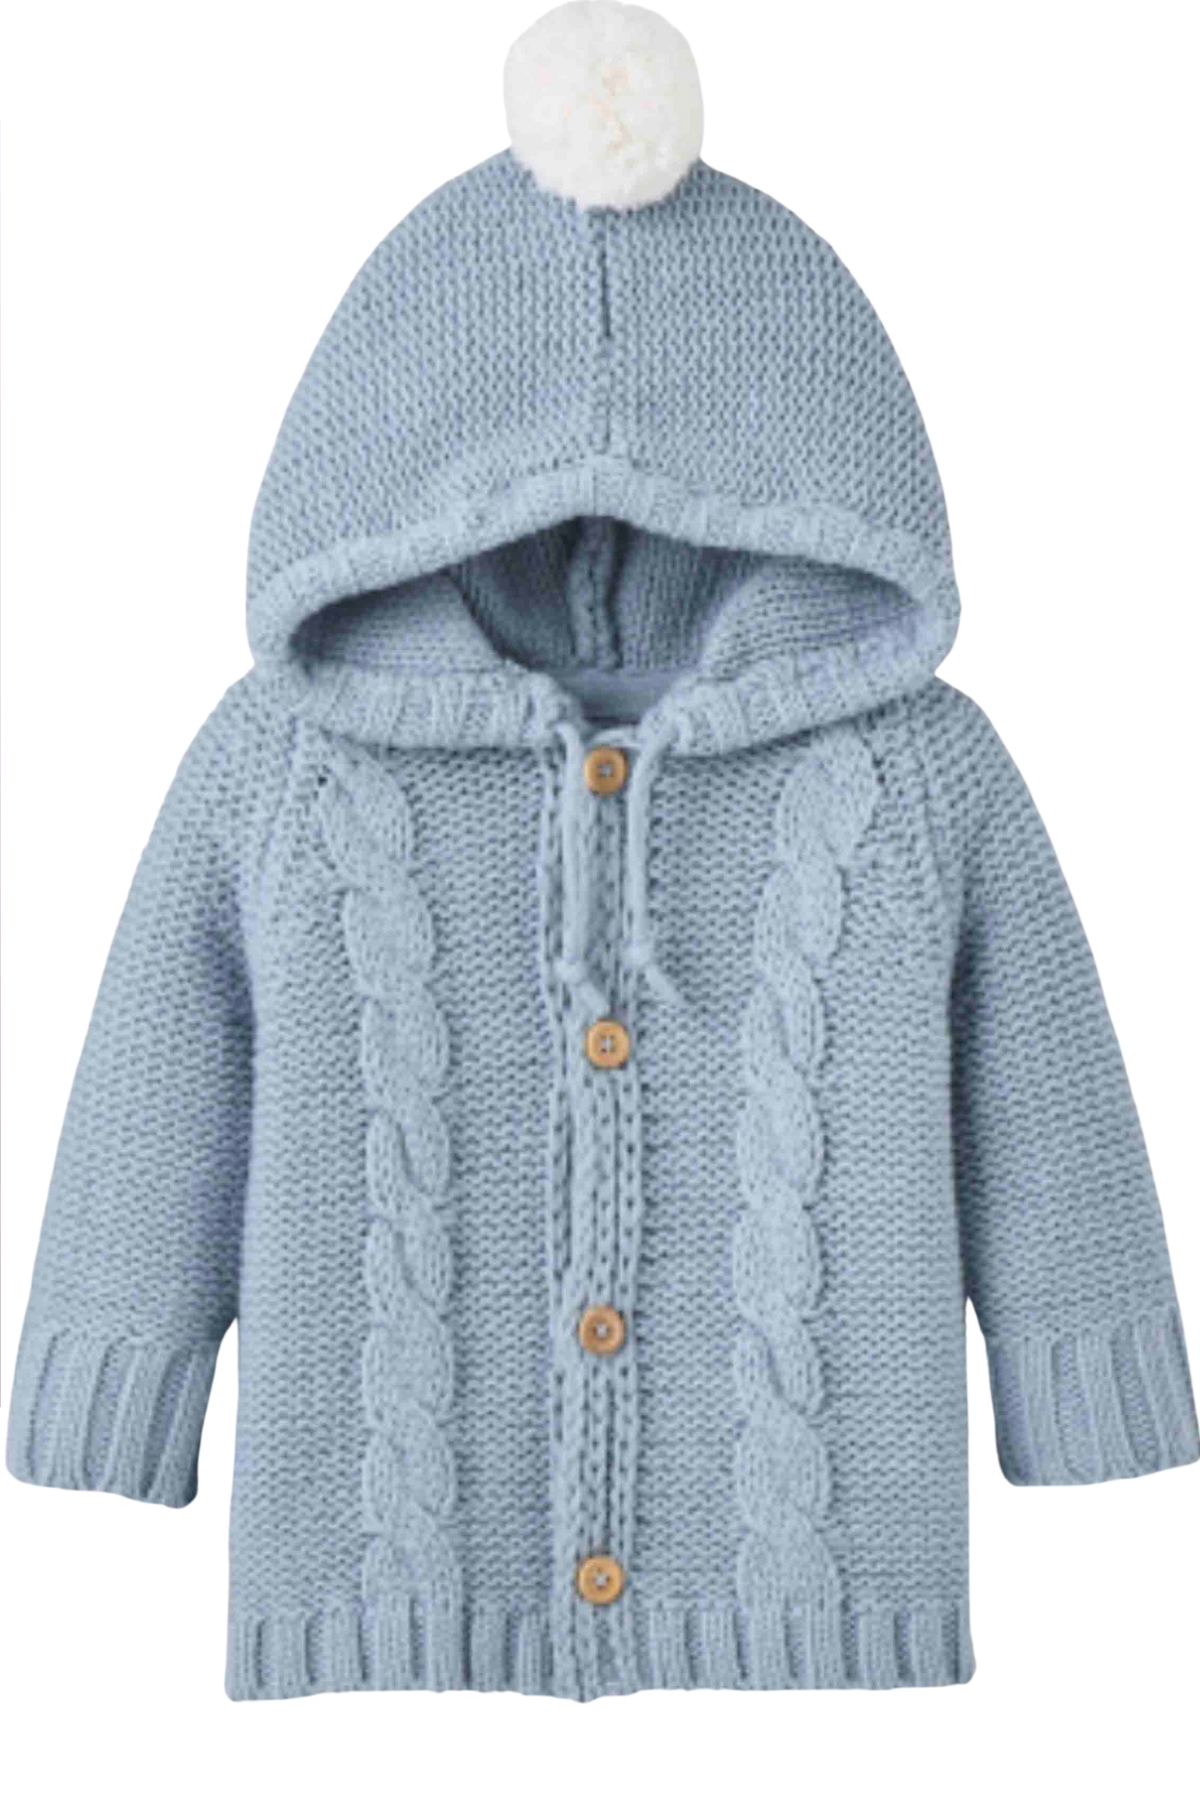 Blue Chunky Hooded Cardigan with Pom by Elegant Baby